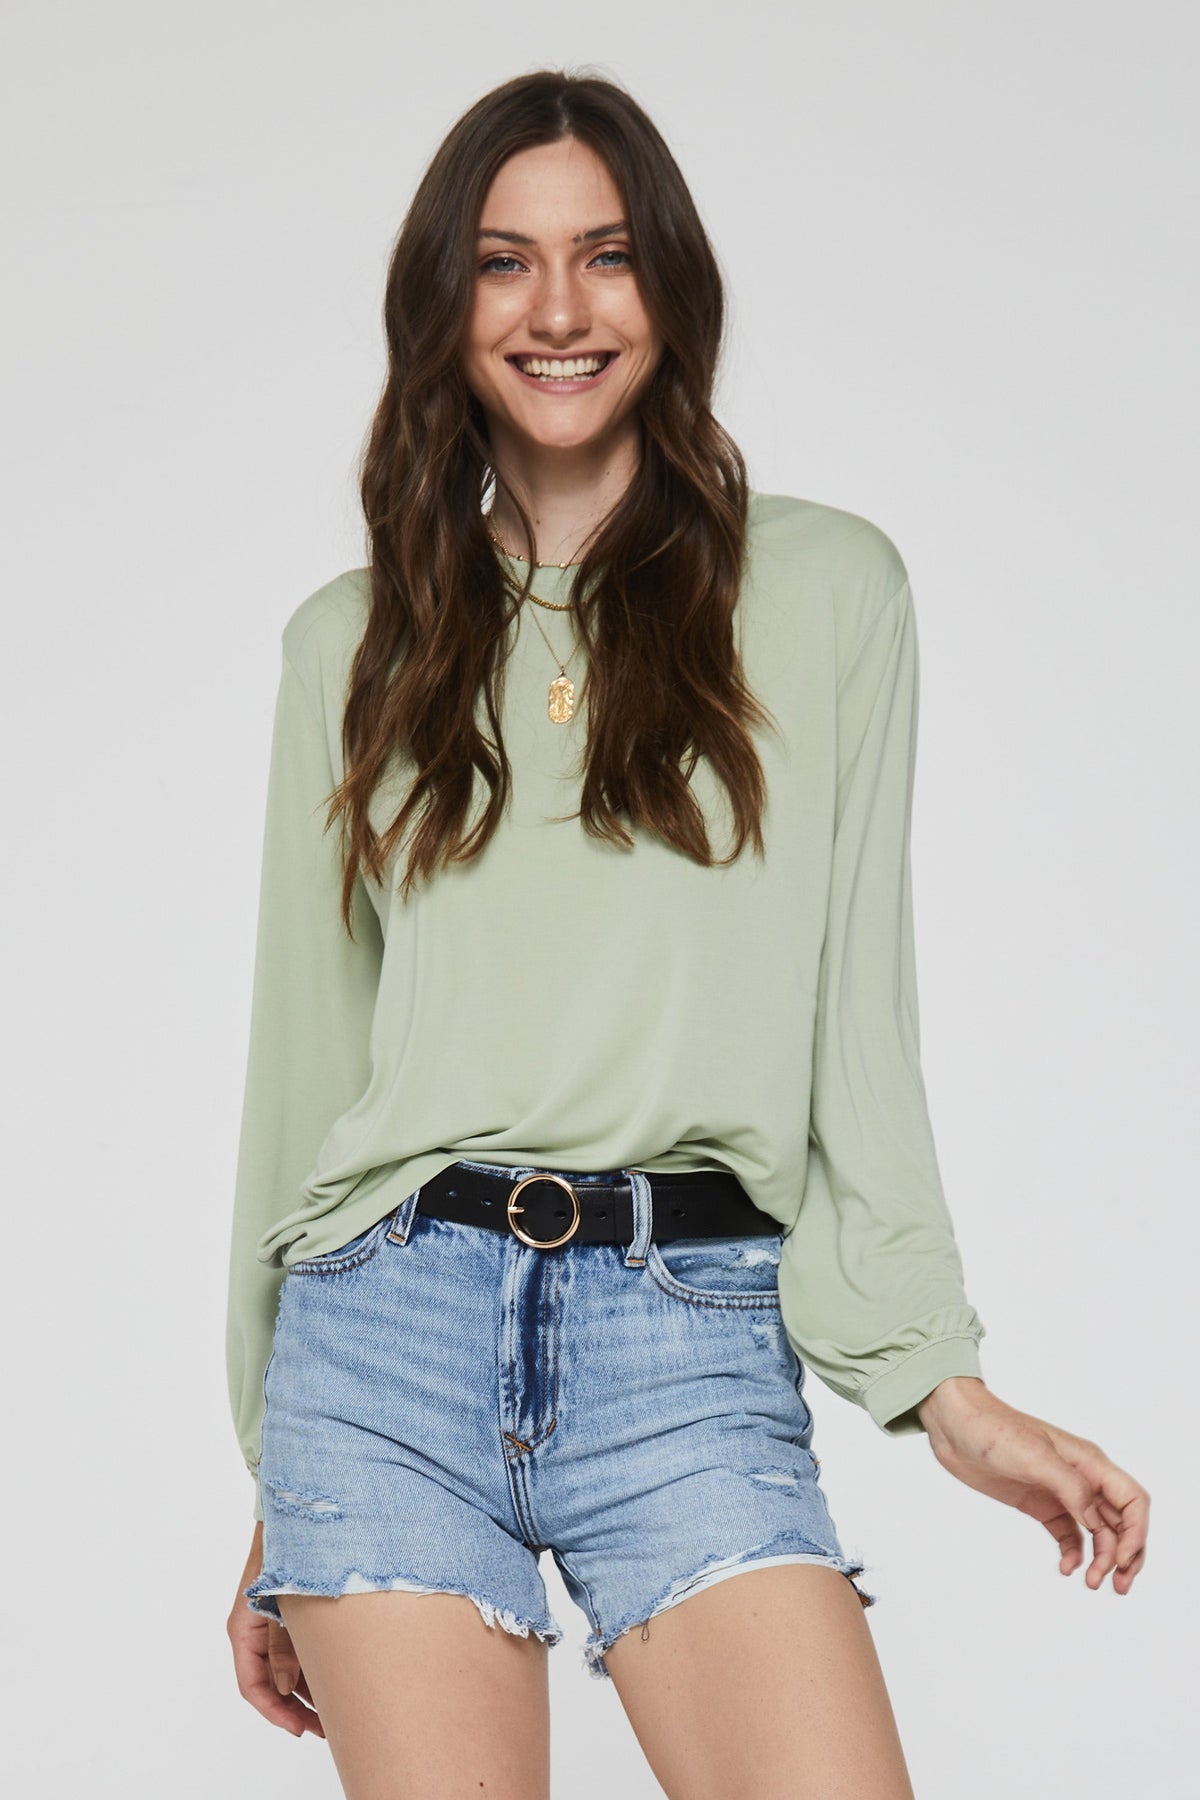 matilda-basic-long-sleeve-top-pistachio-front-image-another-love-clothing